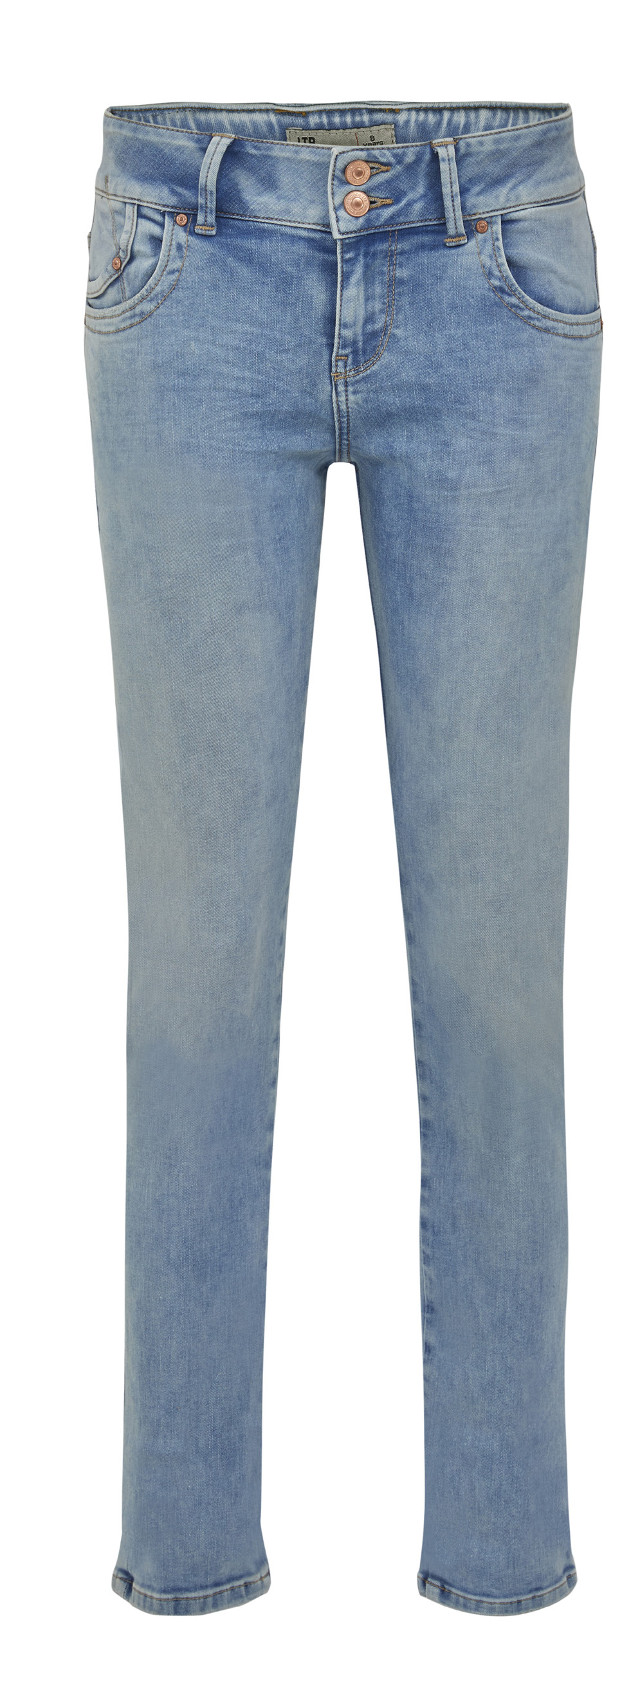 LTB Jeans - Molly M Noelle